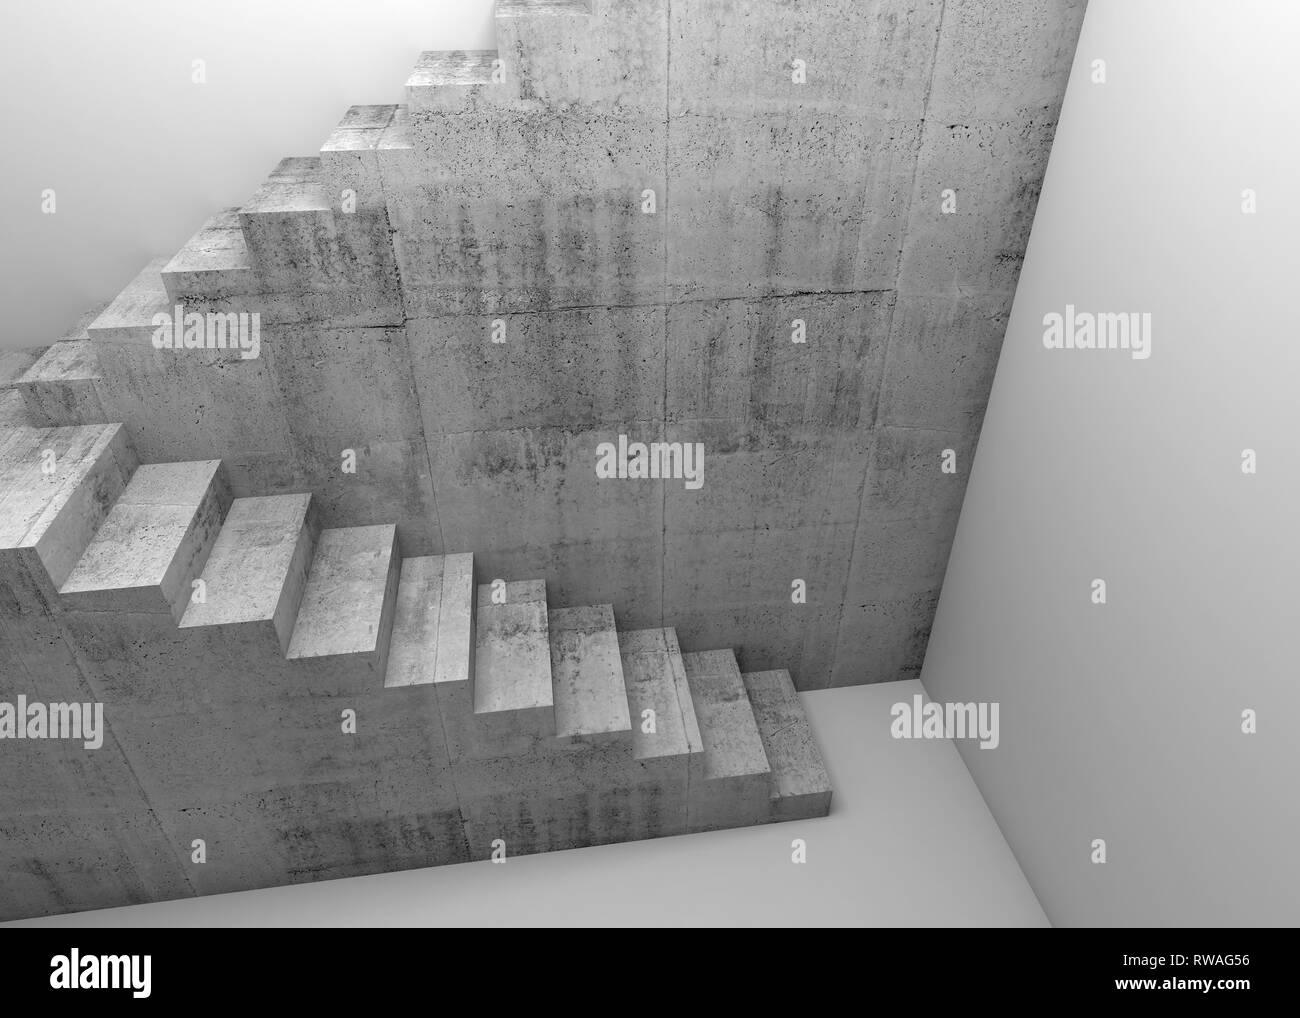 Concrete stairway installation in white empty room, abstract architectural background, 3d render illustration Stock Photo